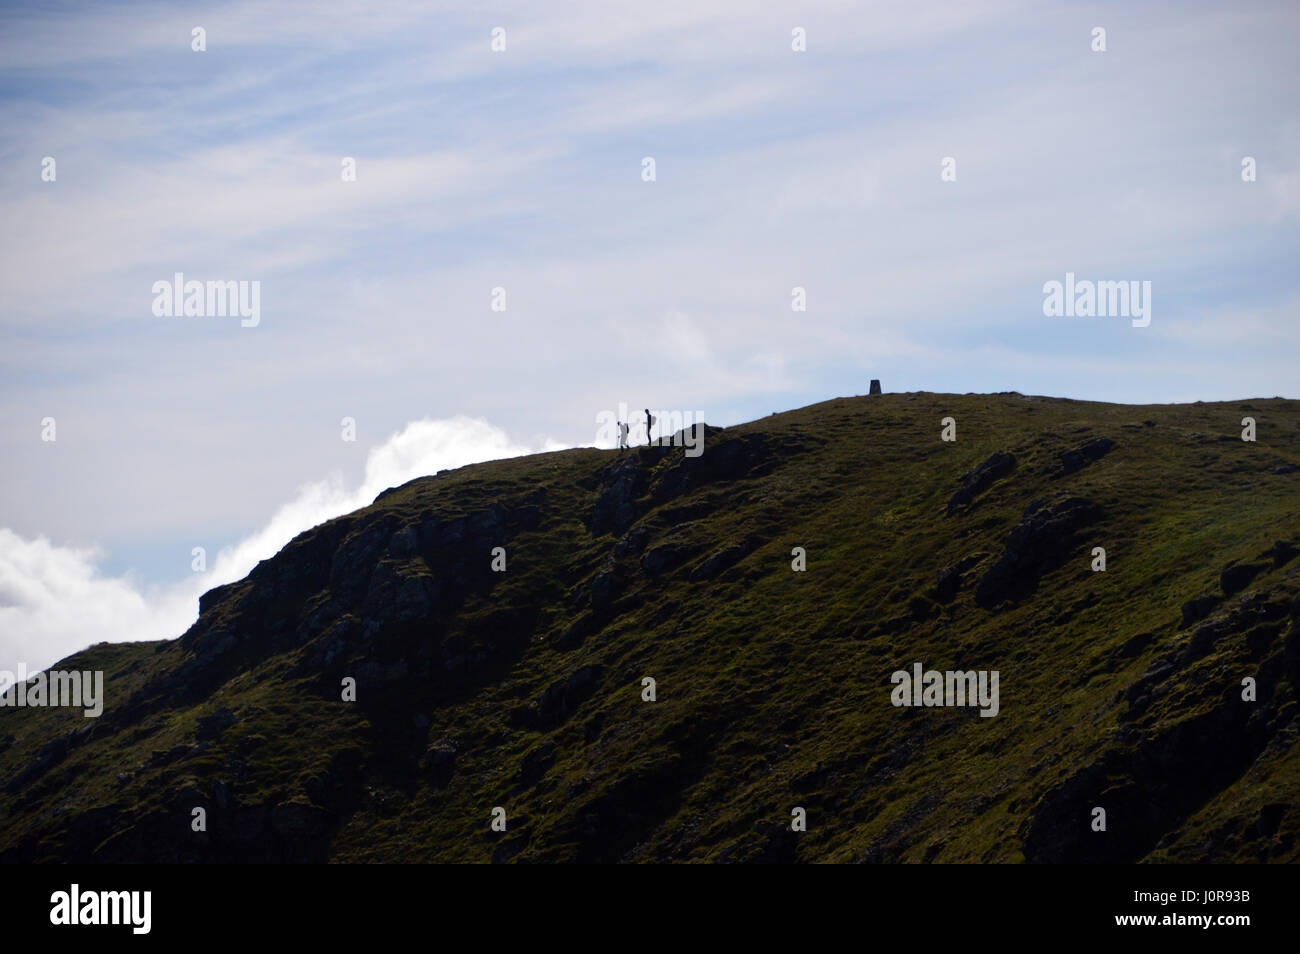 Silhouettes of a Pair of Walkers on the Summit of the Scottish Mountain Corbett Ben Ledi in the Trossachs National Park, Scottish Highlands. Stock Photo